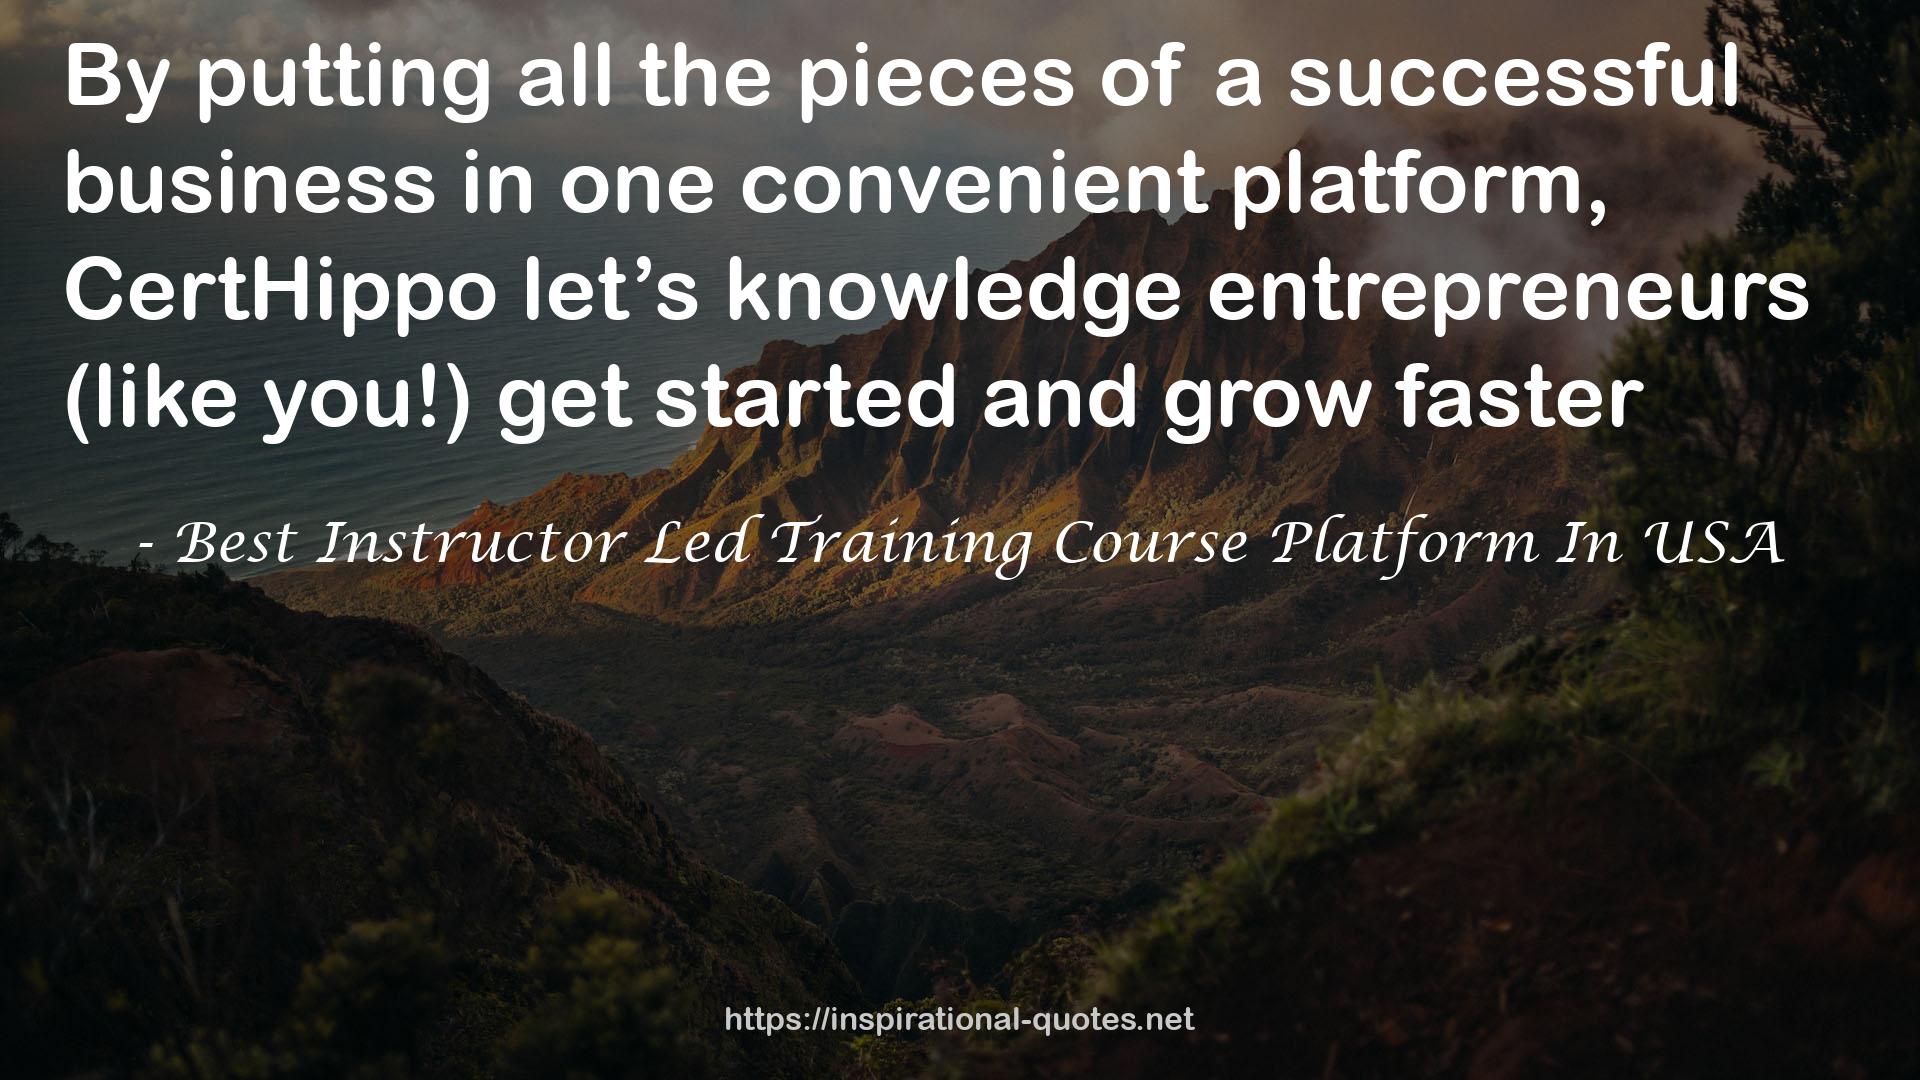 Best Instructor Led Training Course Platform In USA QUOTES